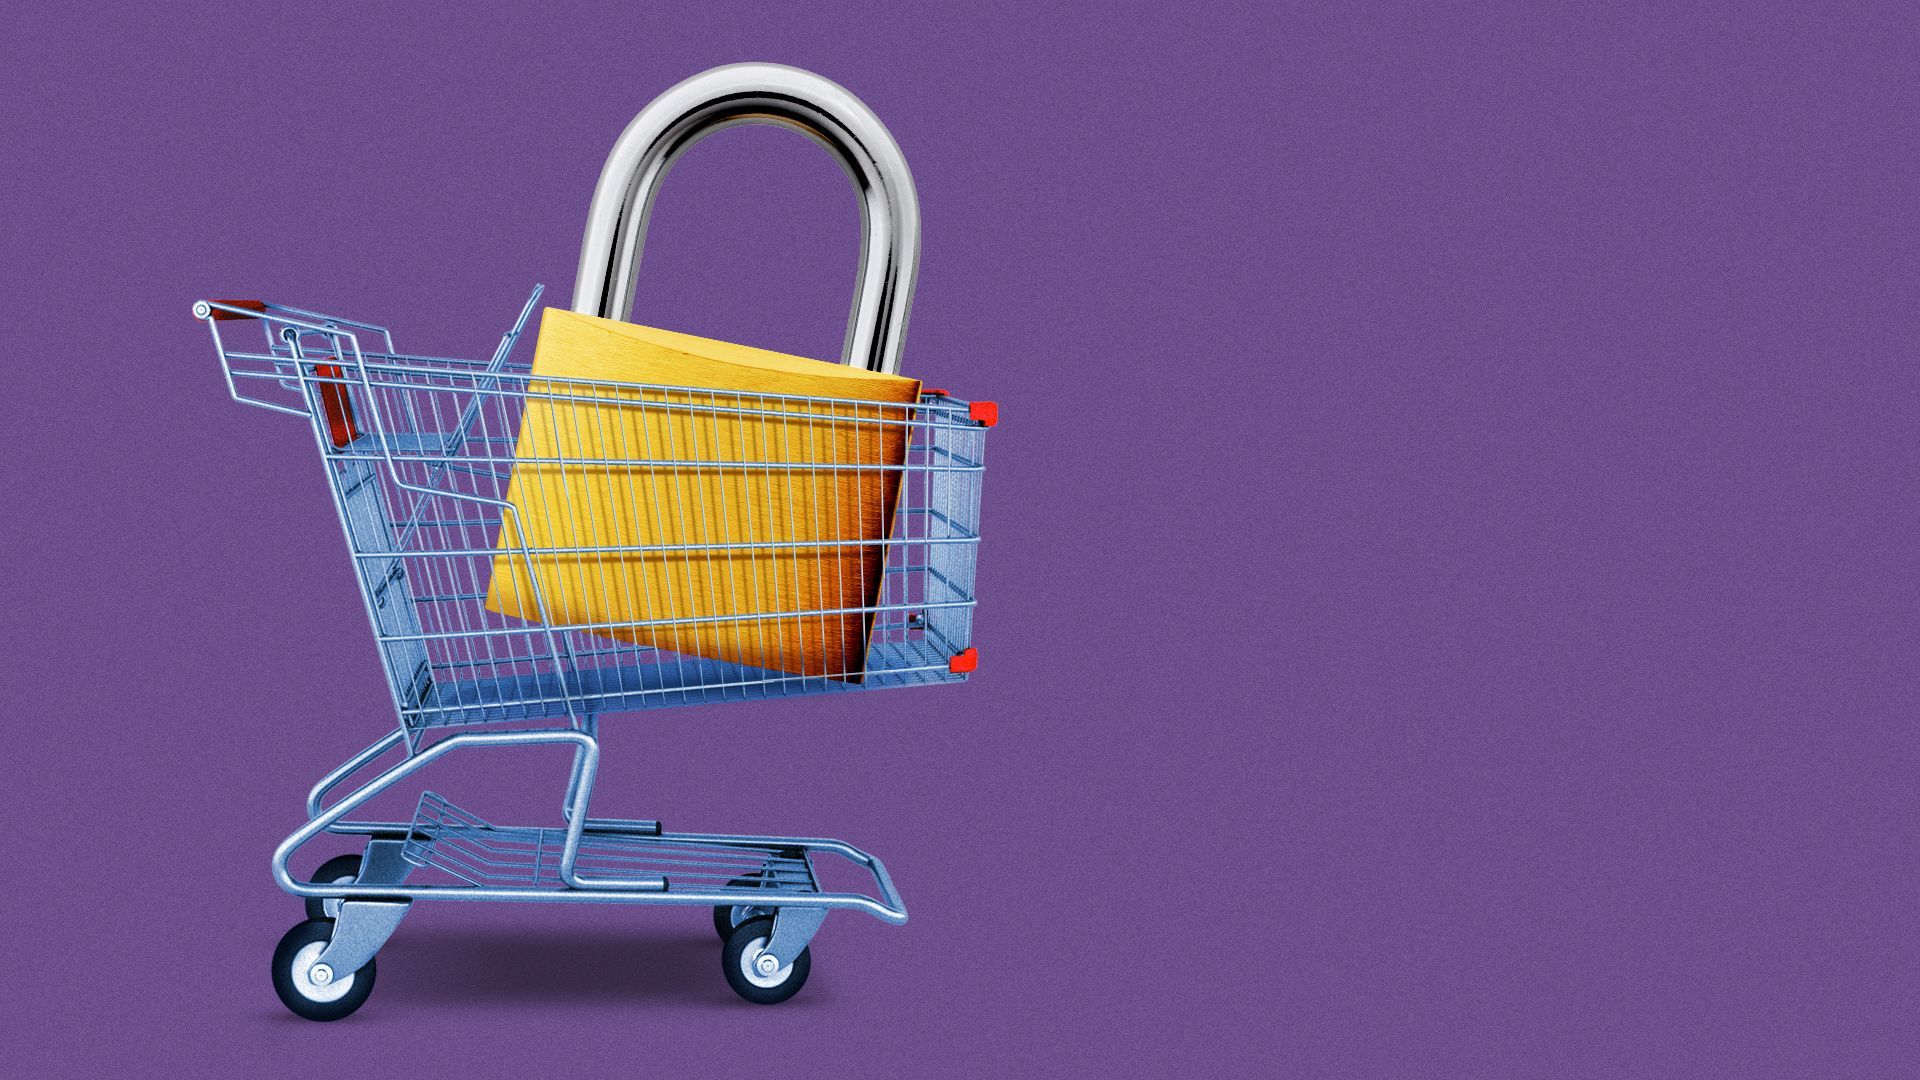 Illustration of a shopping cart with a giant padlock inside